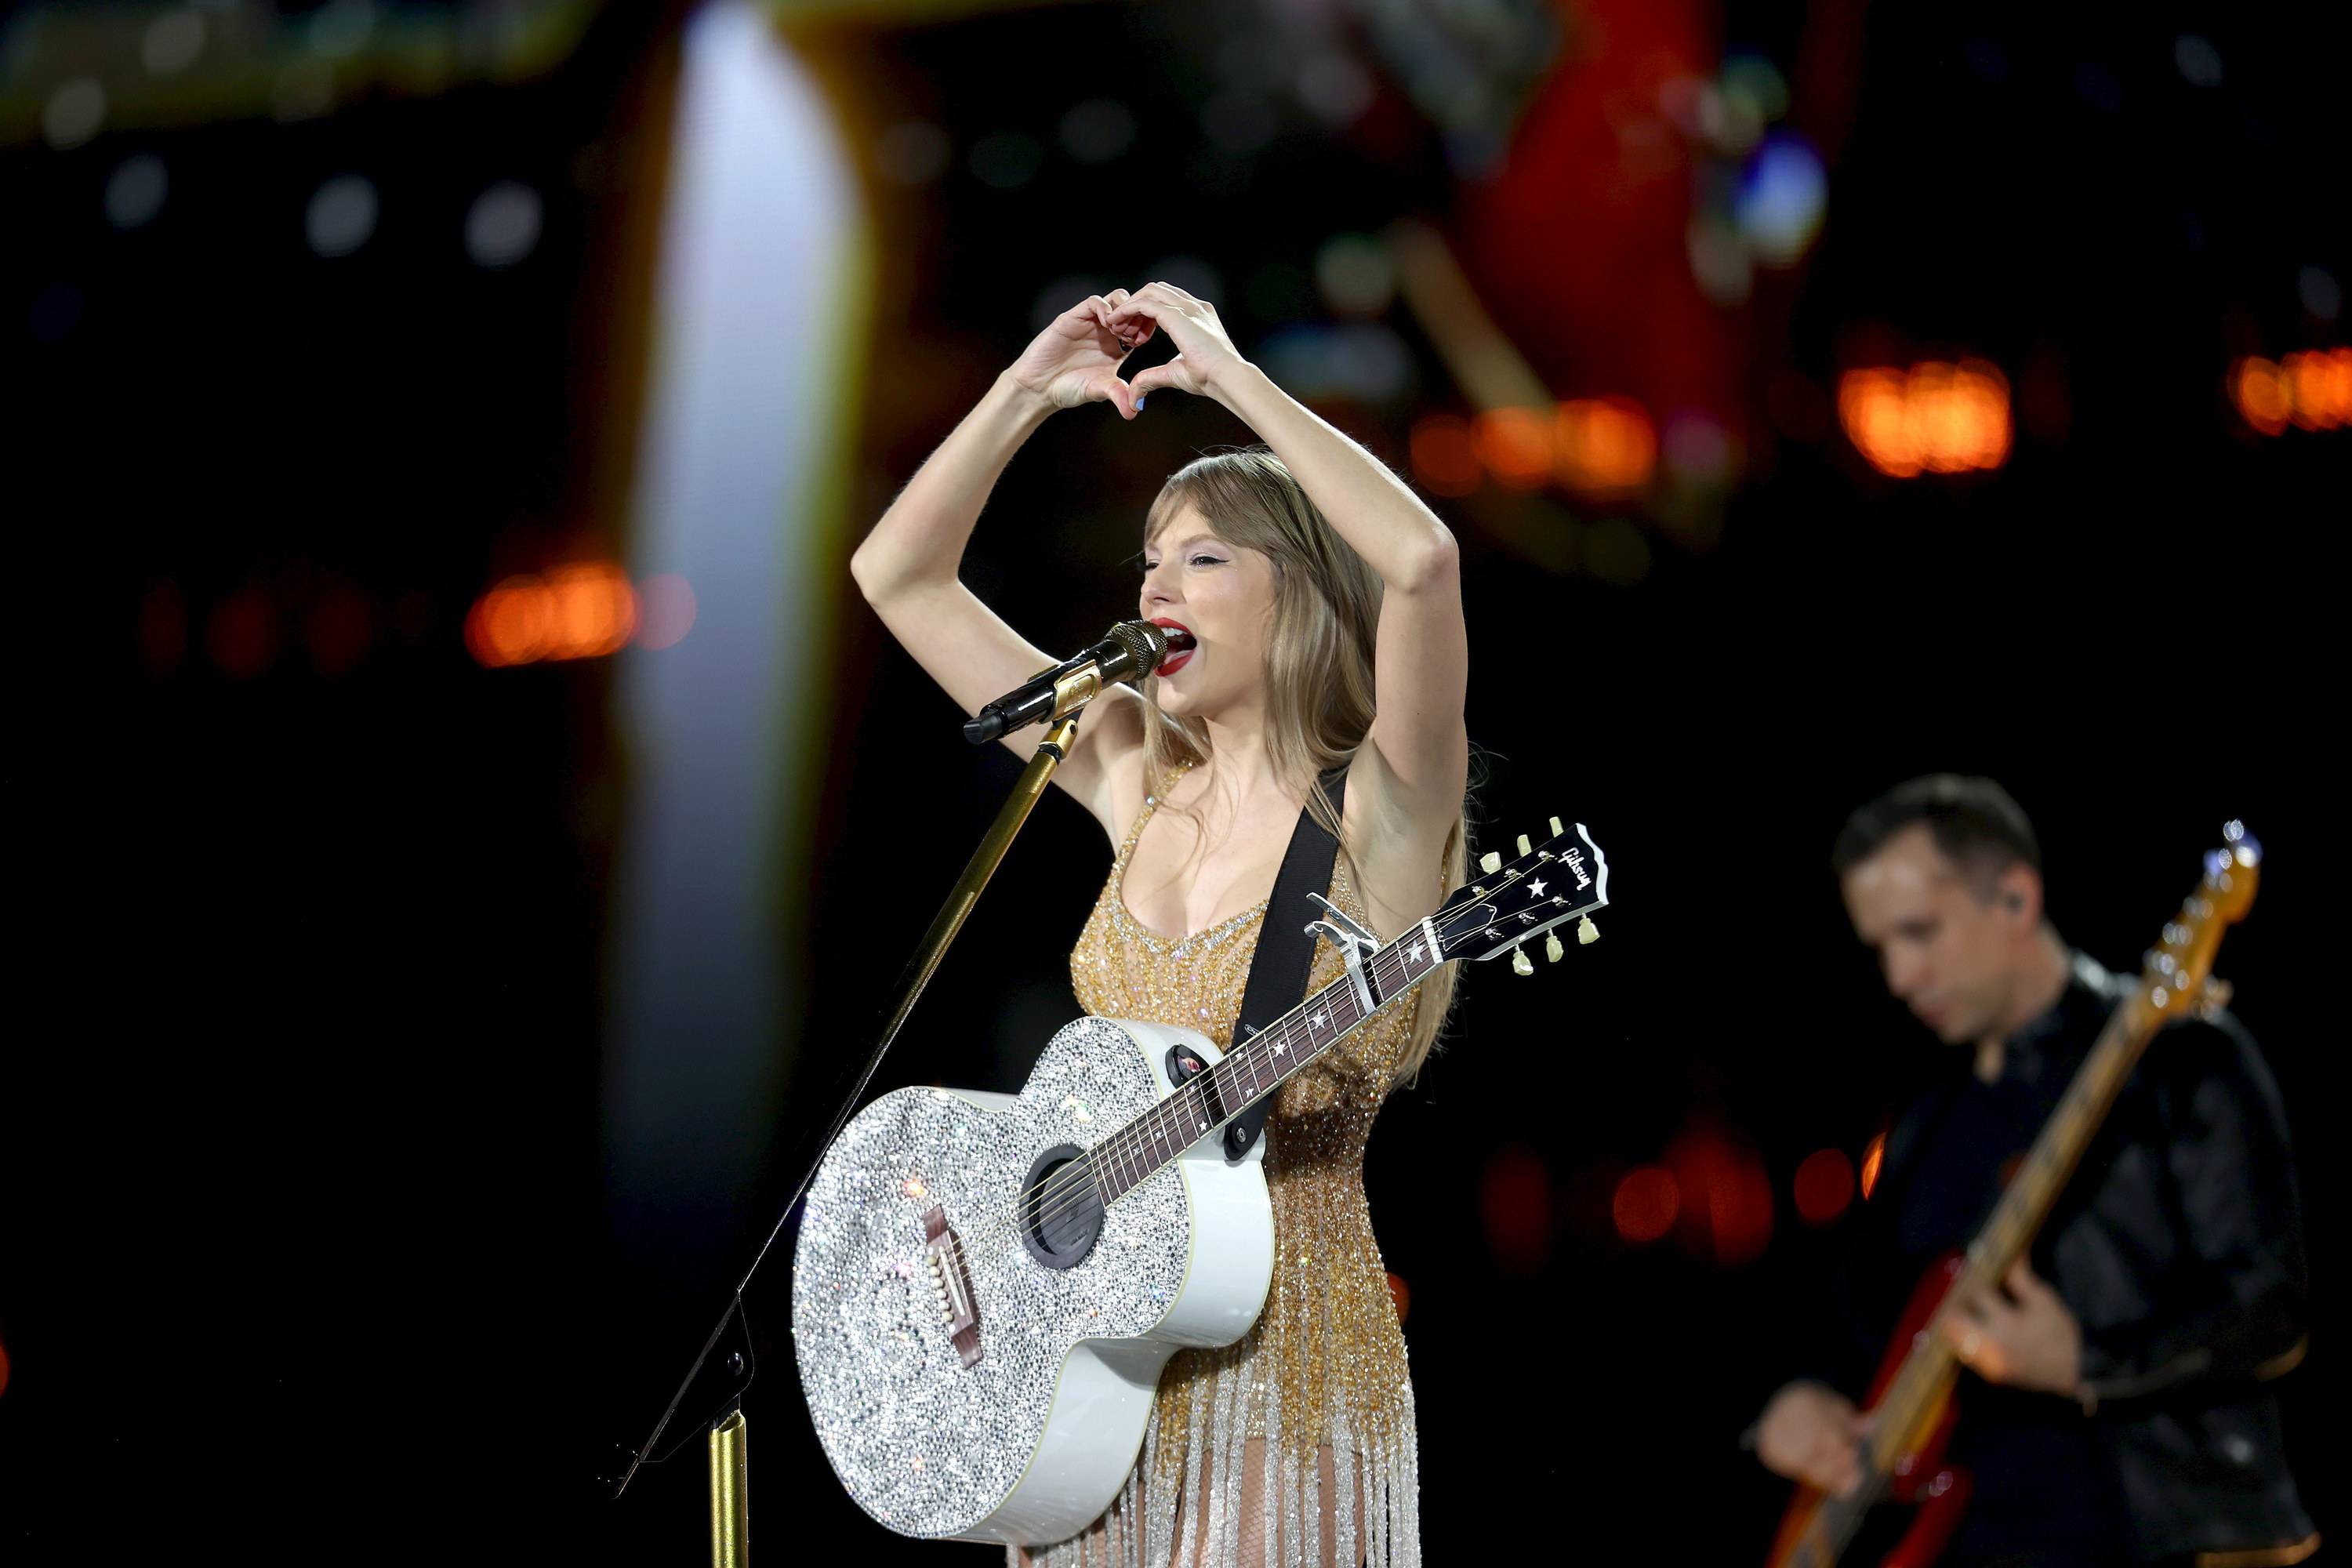 taylor singing on stage